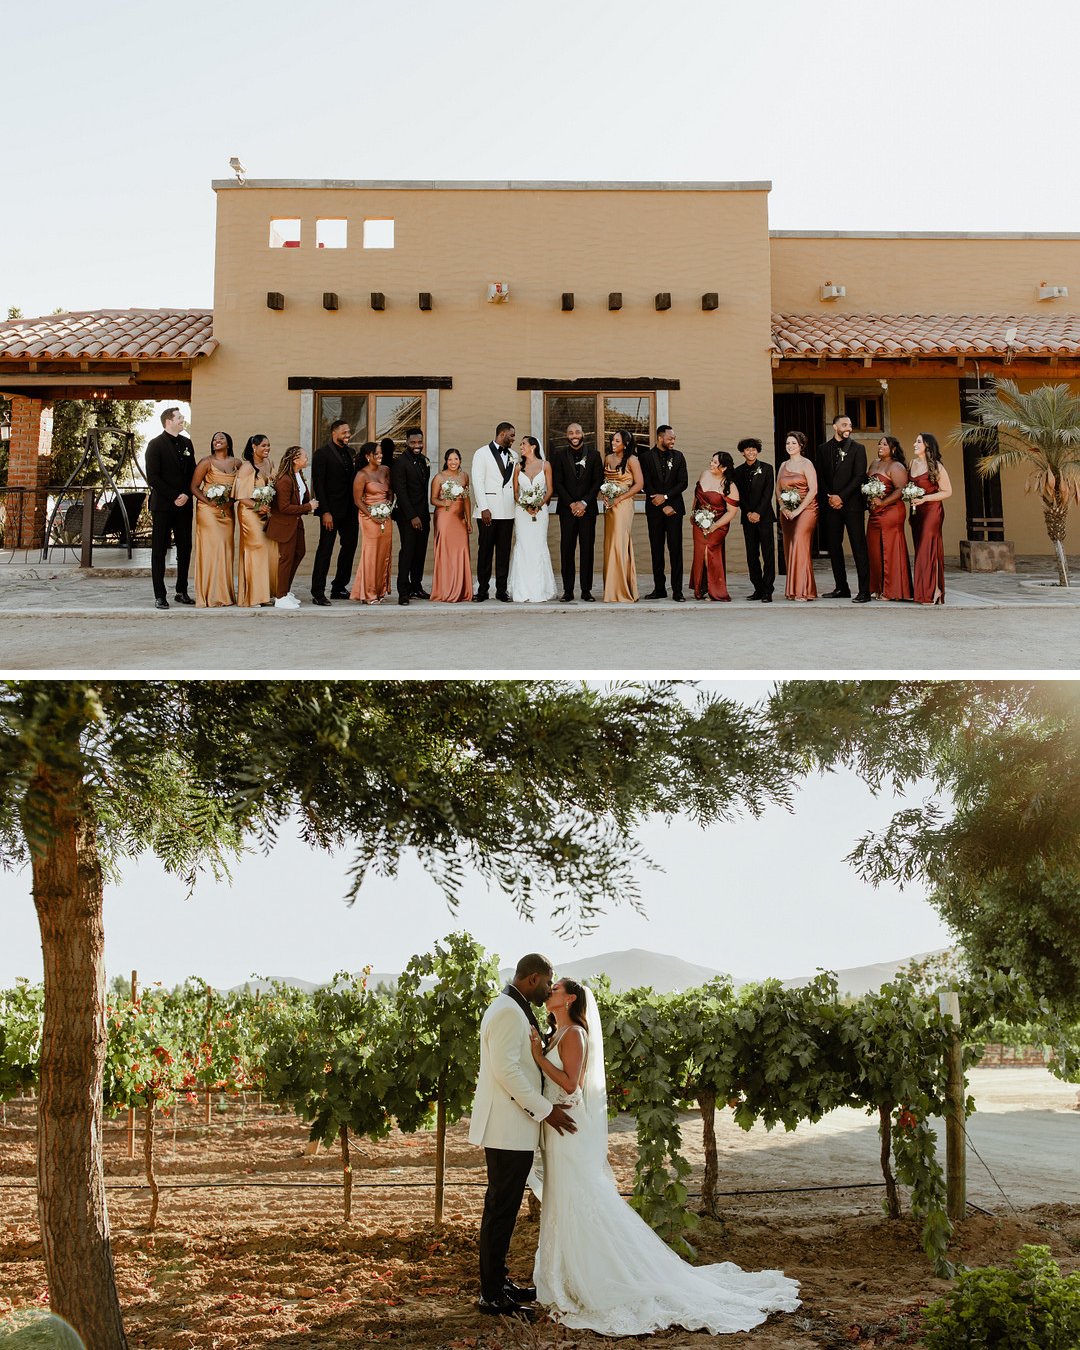 couple pose with wedding group at Rancho Los Retoños, bride and groom in white kiss in Baja California vineyard